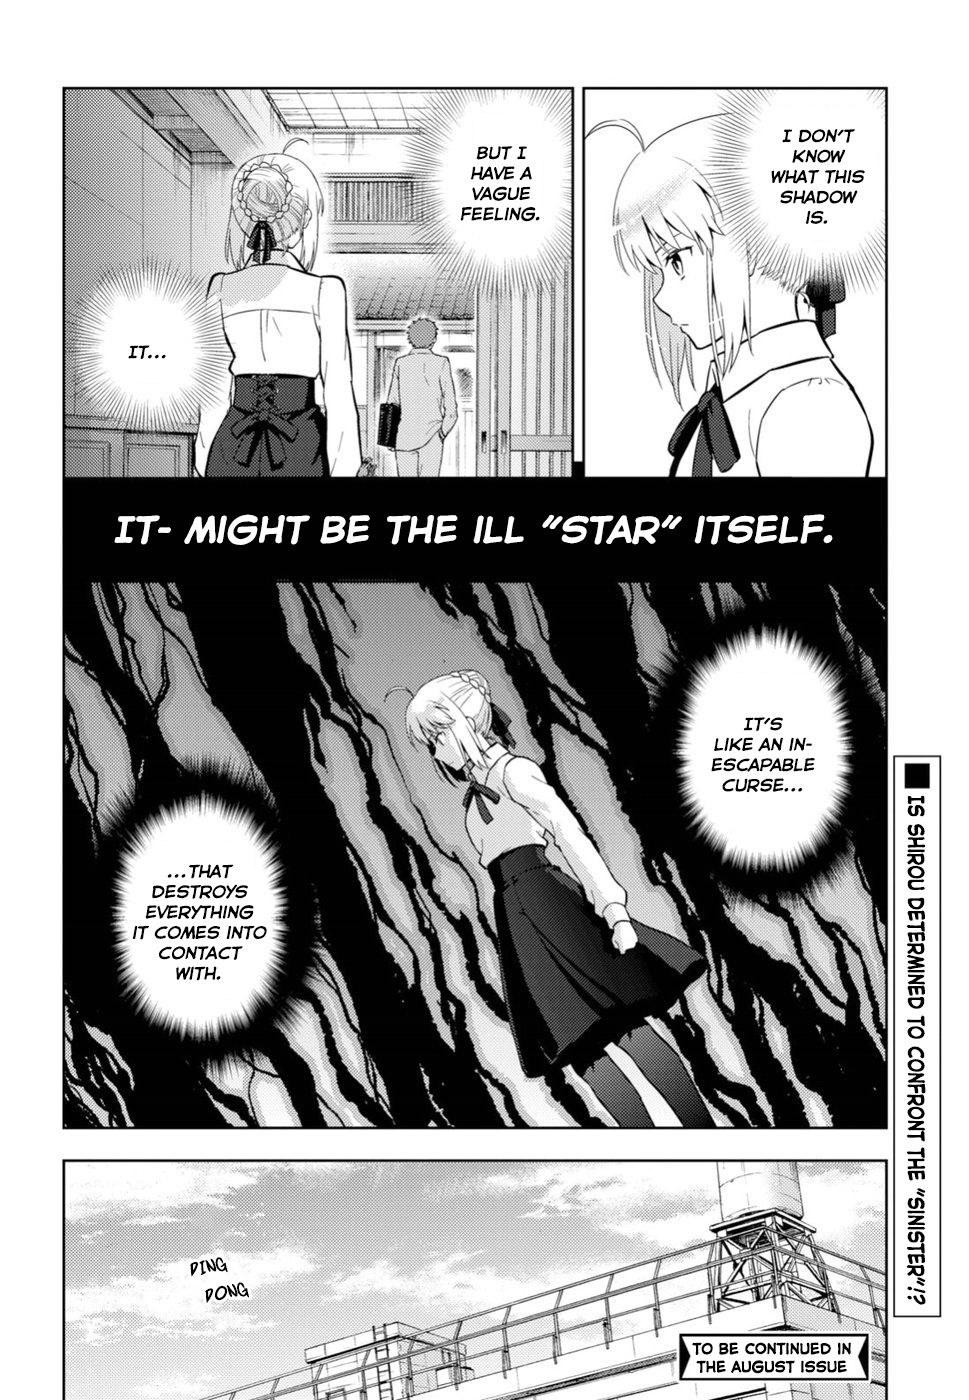 Fate/stay night: Heaven's Feel Vol. 8 Ch. 48 Day 7 / Madness (3)